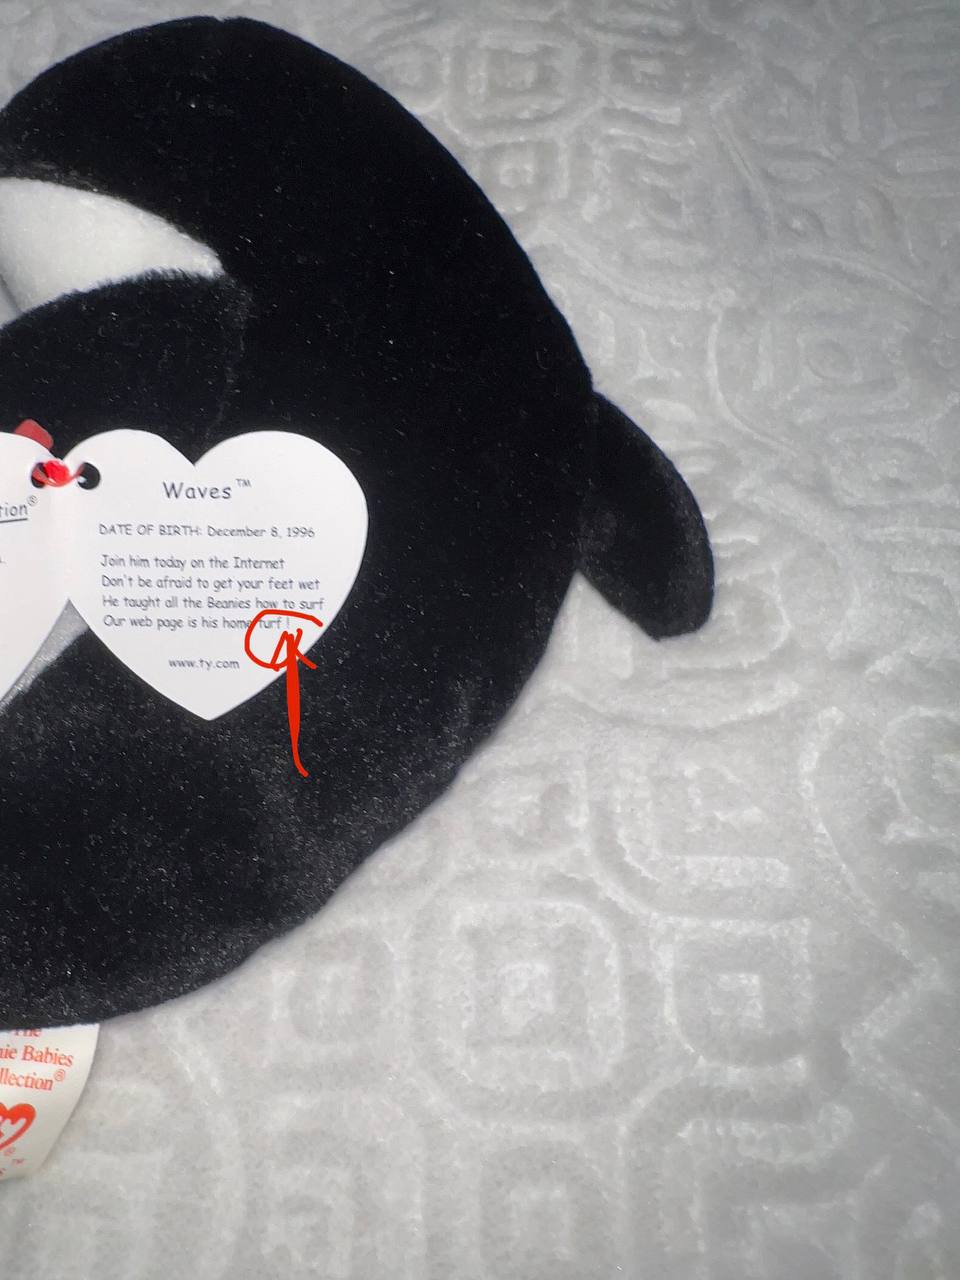 *RARE* MINT Waves 1996 Beanie Baby With Tag in Pristine Condition